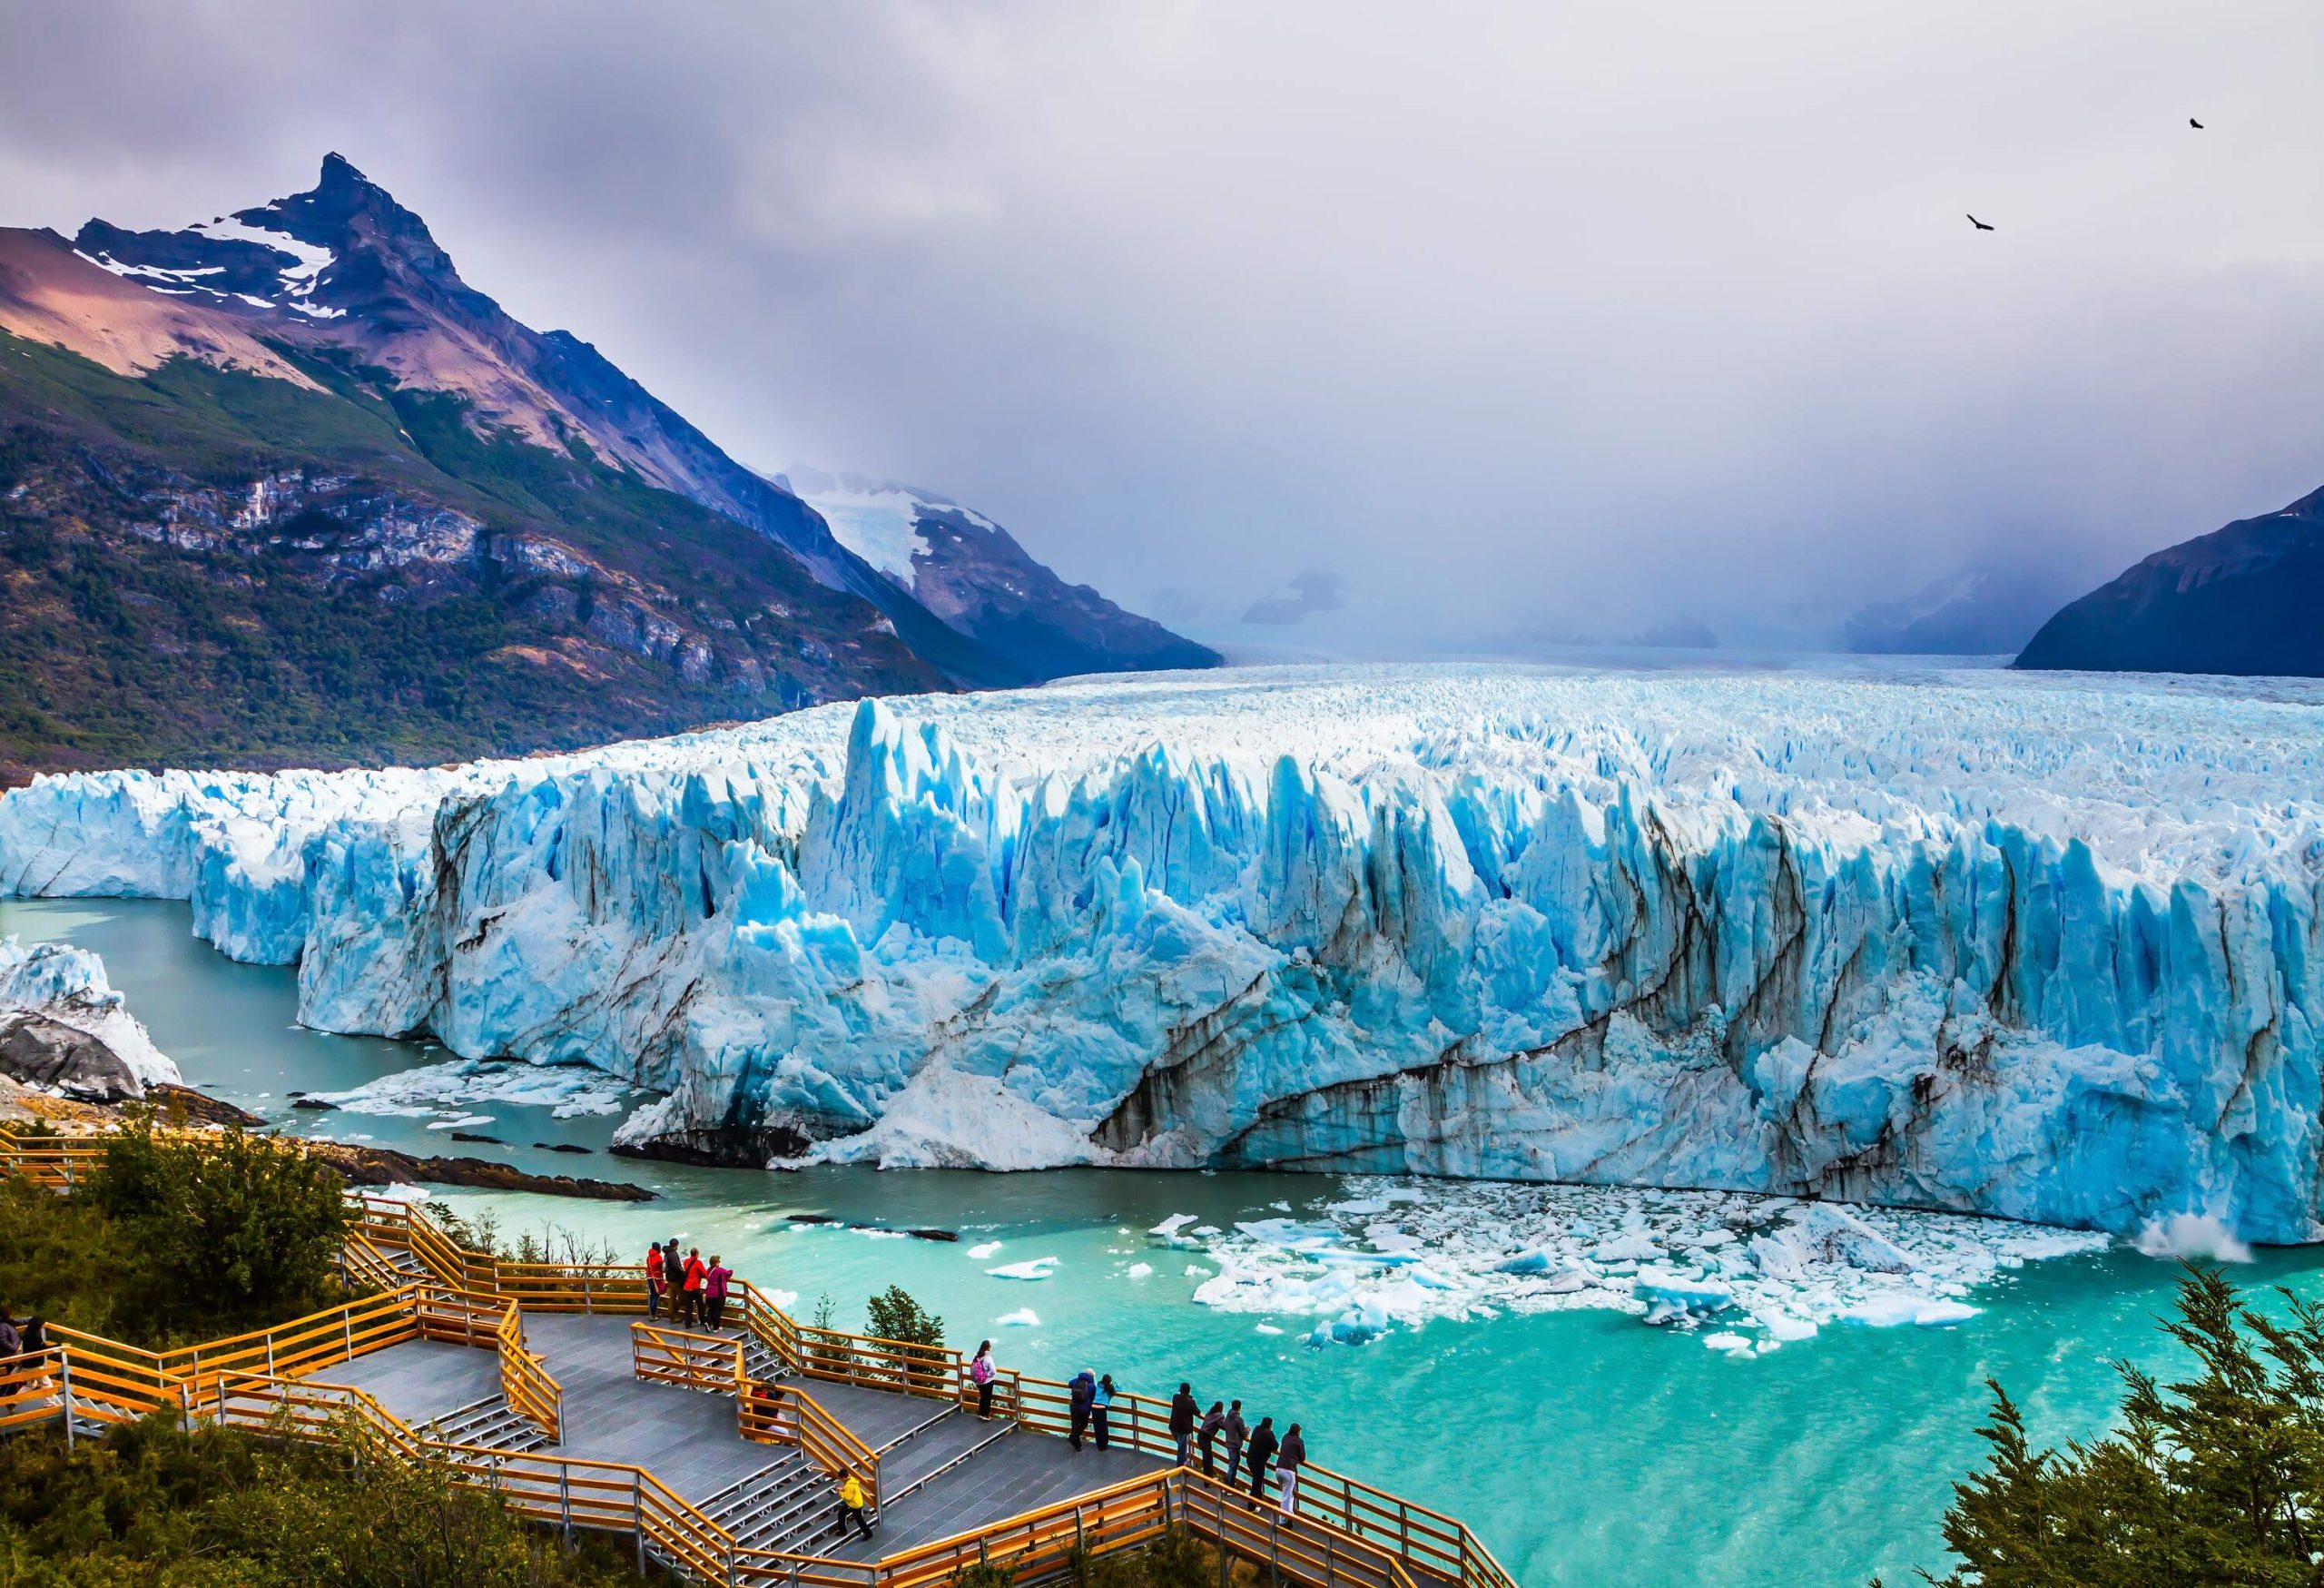 People on a boardwalk watching a glacier gradually melting into a lake.